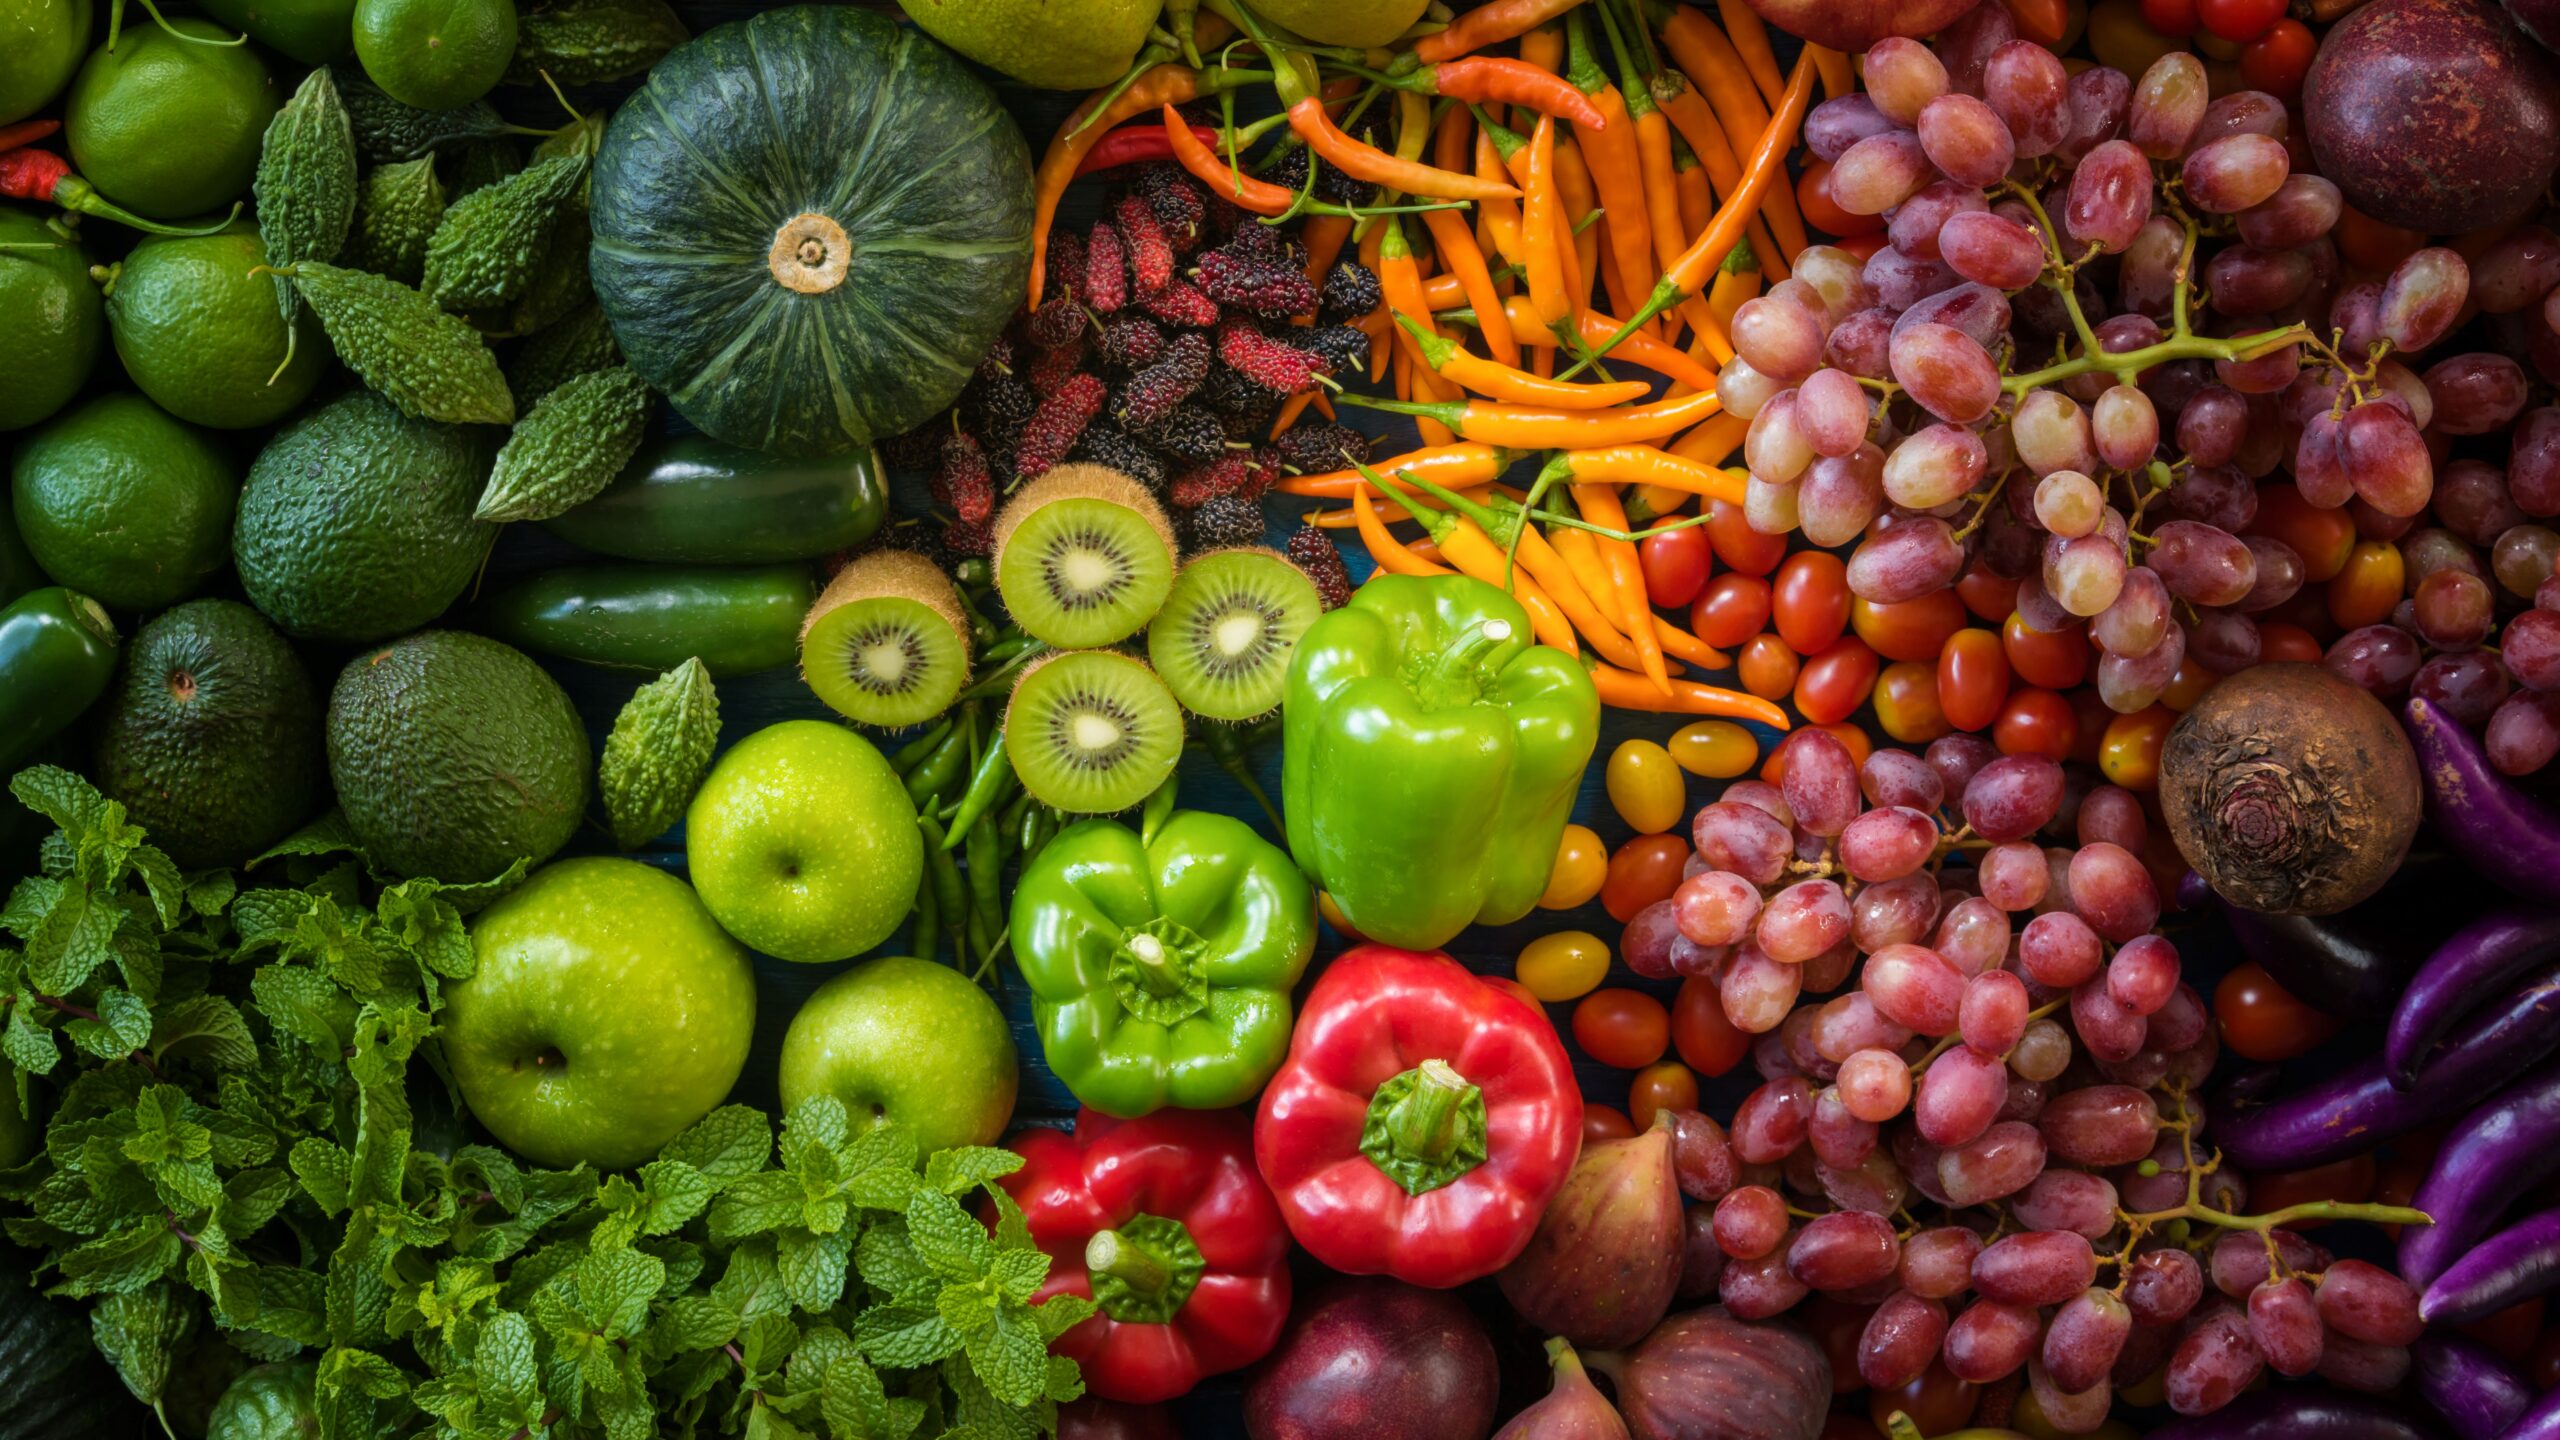 Fruit & Vegetables in a rainbow-like order